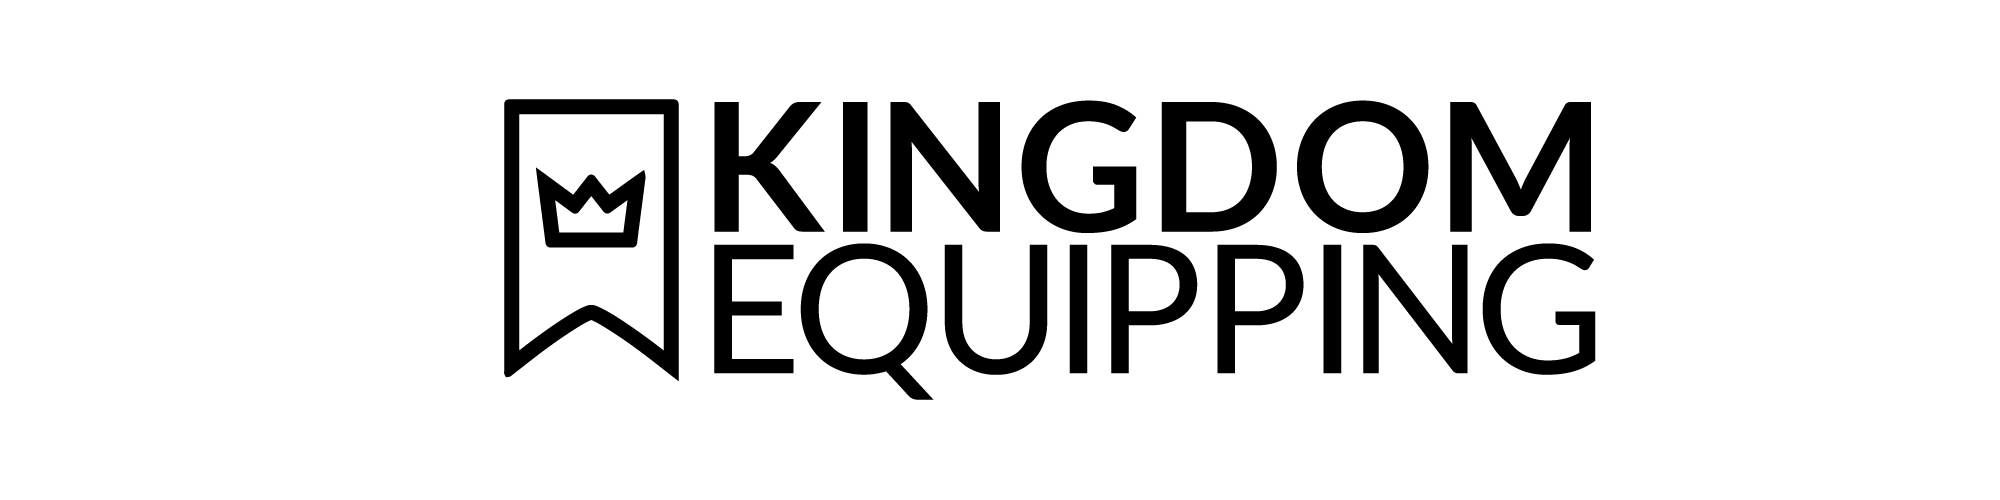 Power and Identity Session 3 | Kingdom Equipping